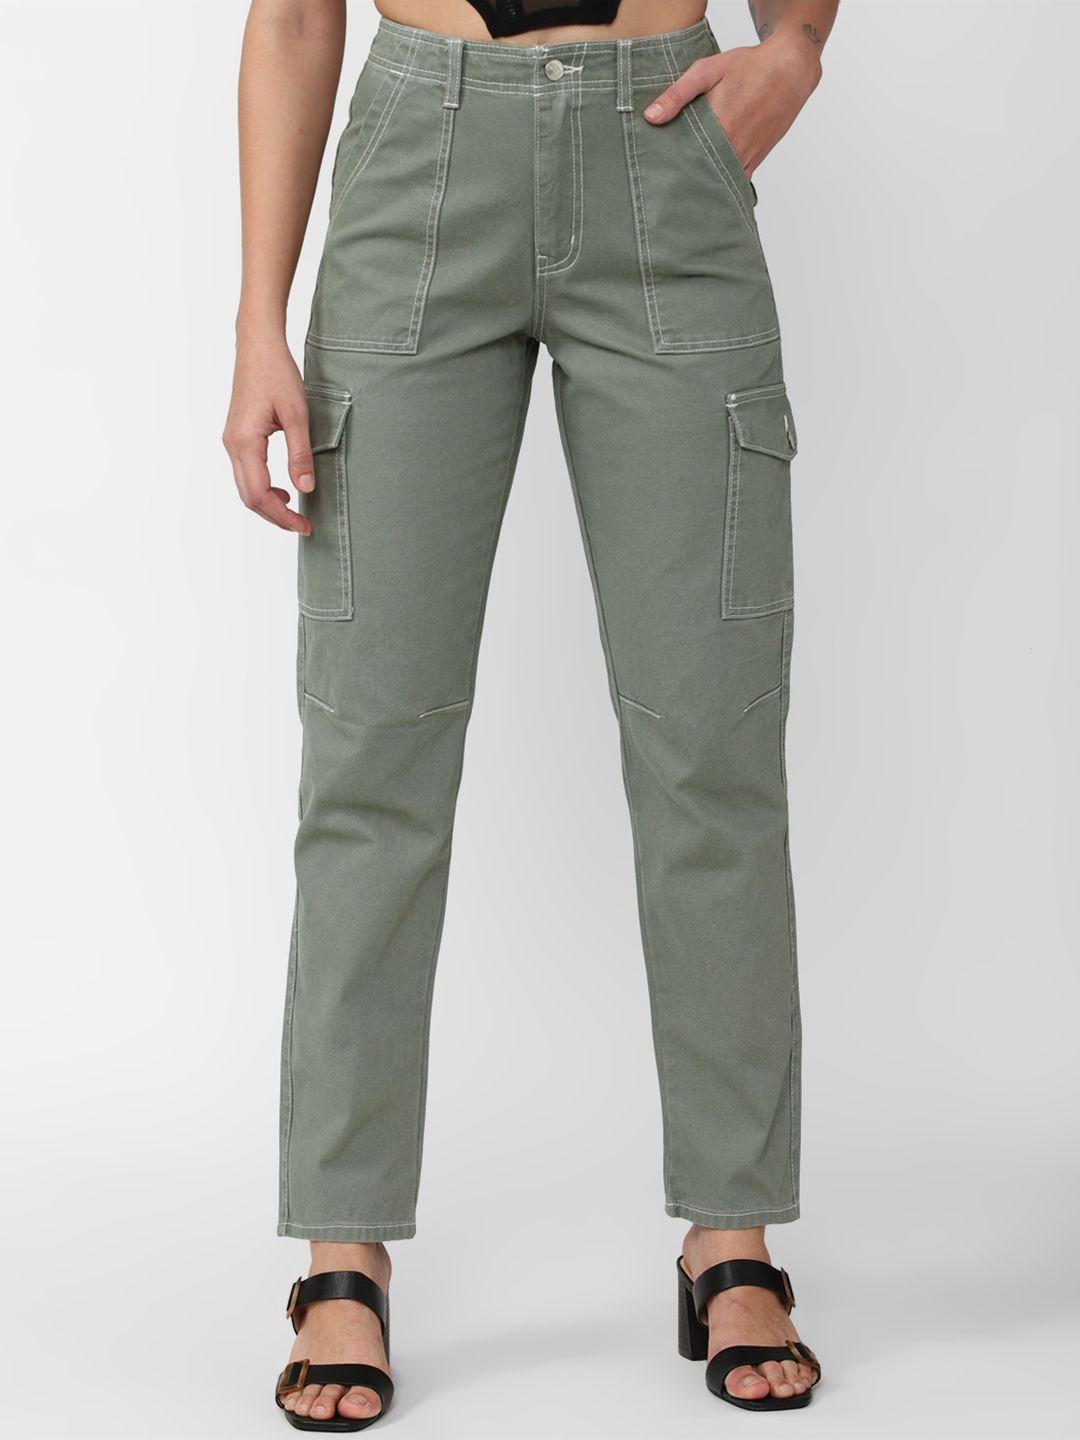 FOREVER 21 Women Grey Pure Cotton Solid Cargos Trouser